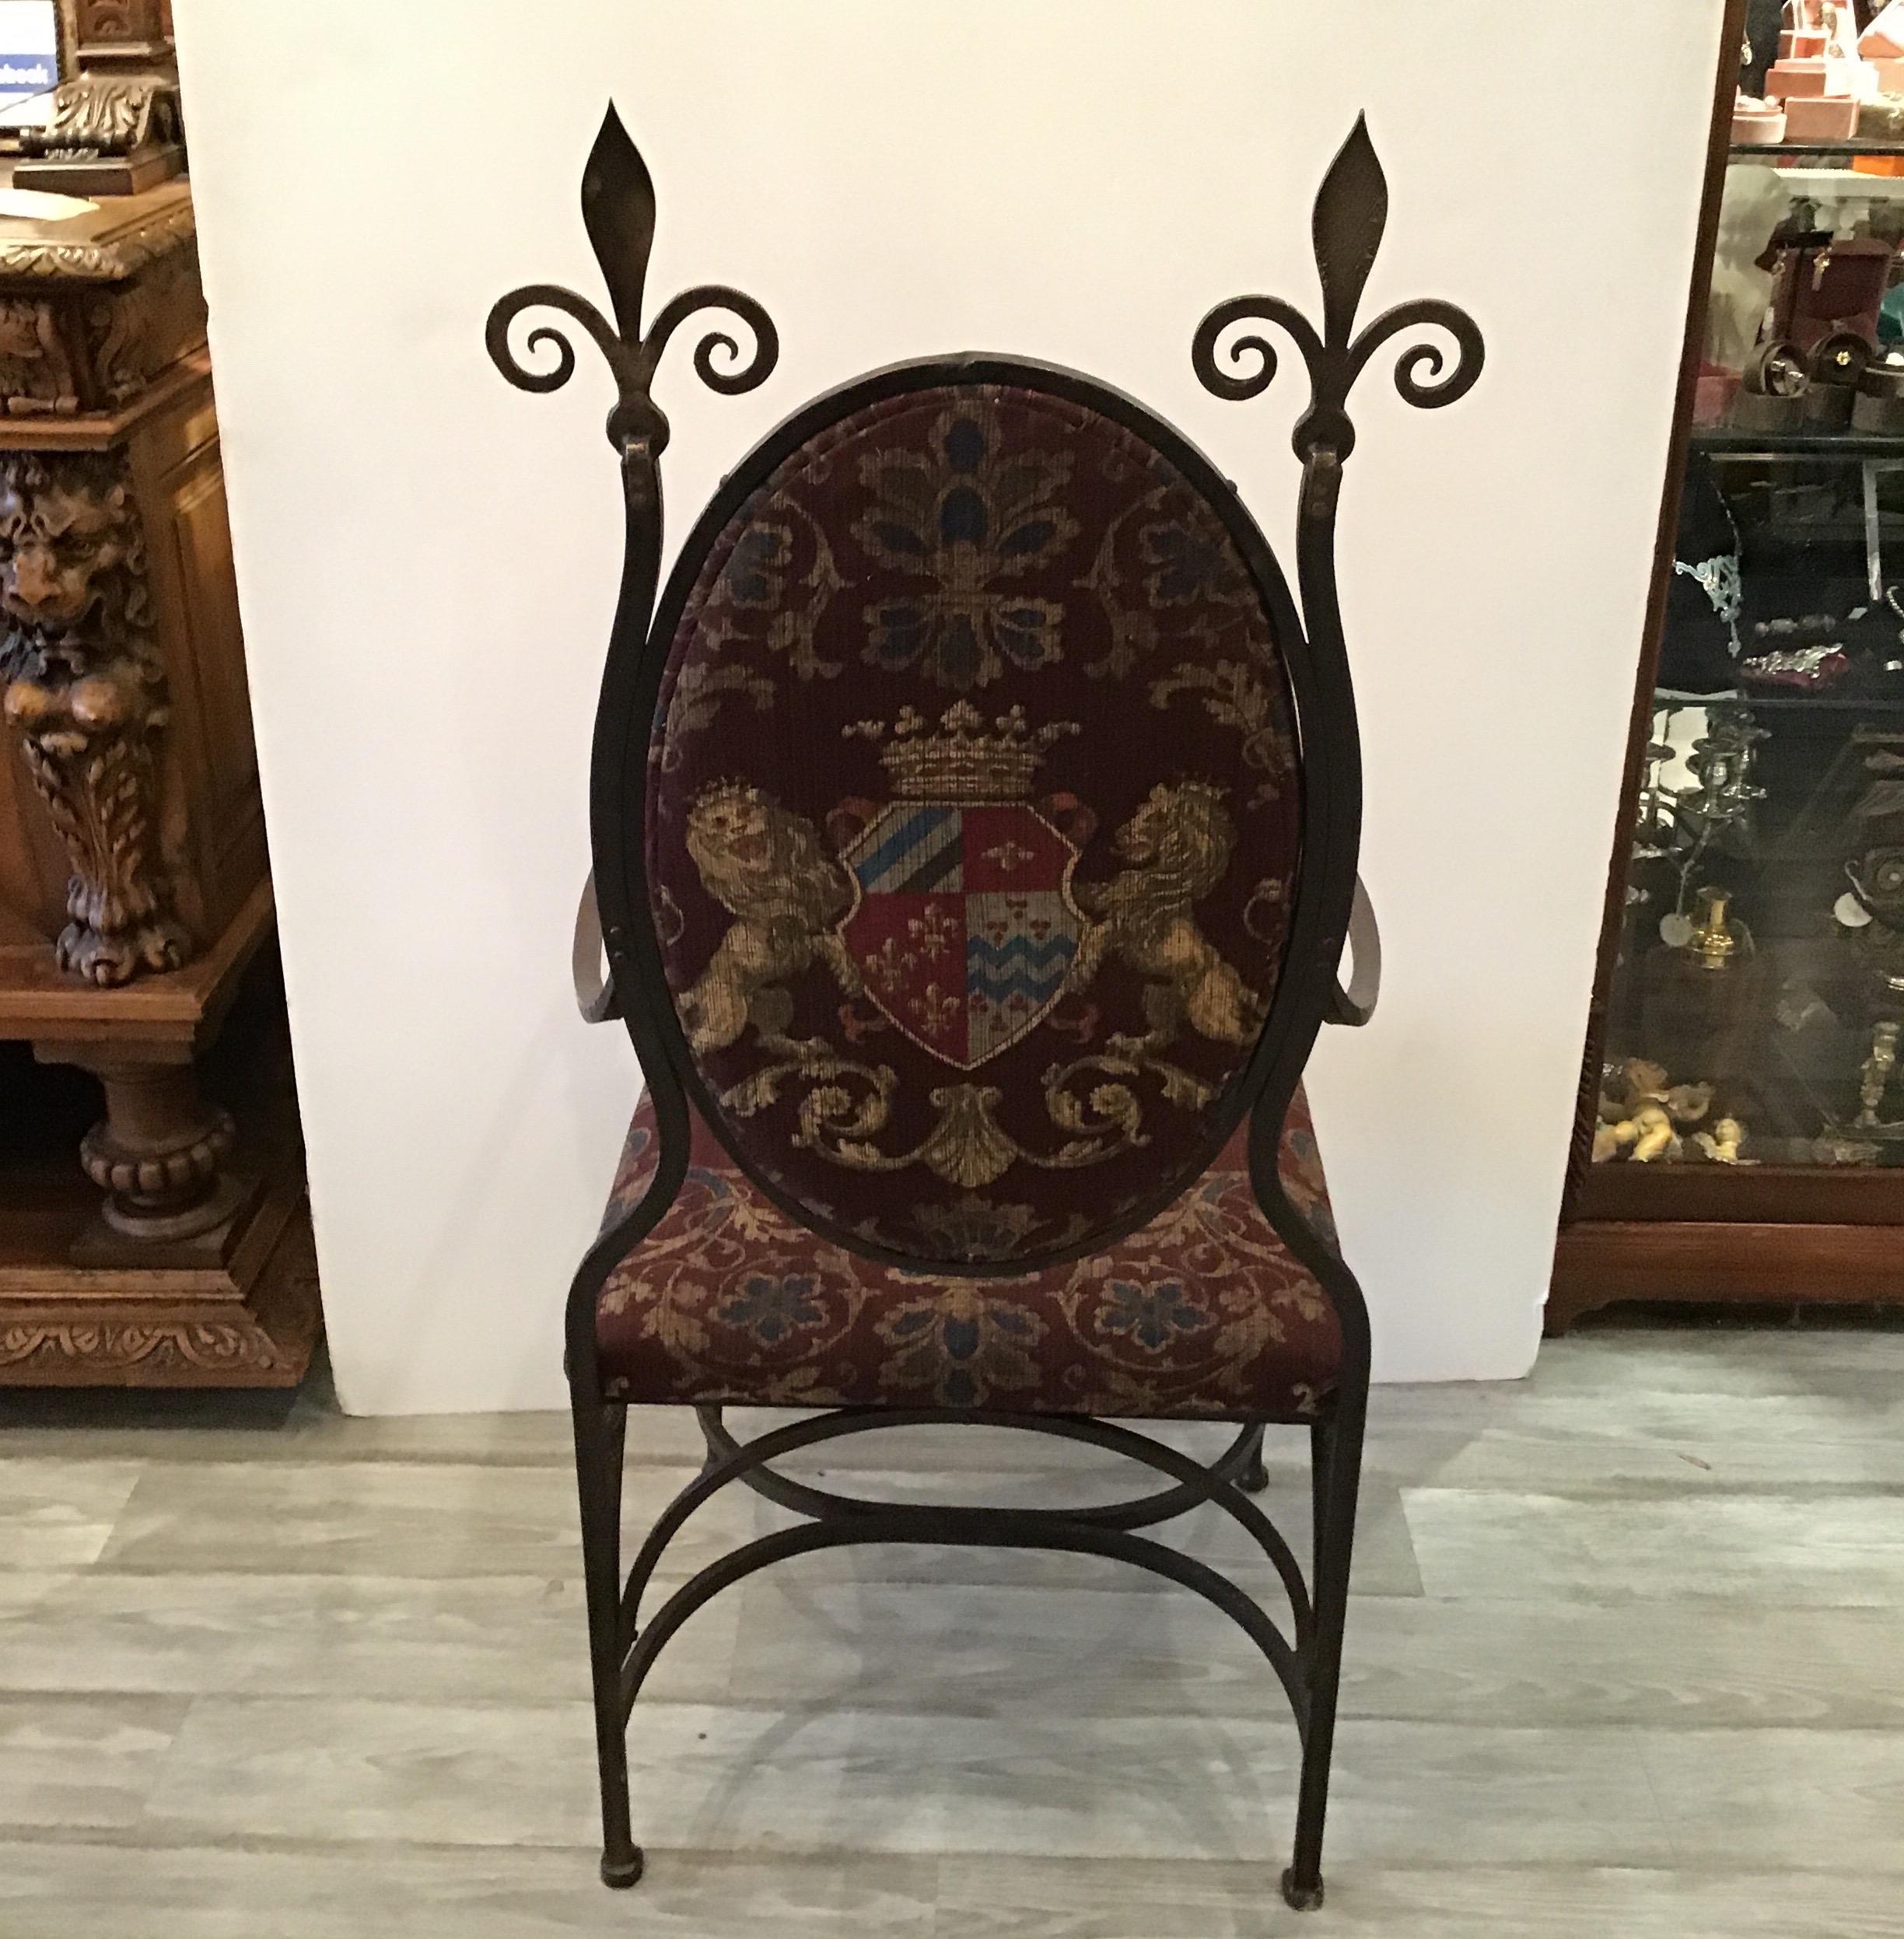 Handmade Wrought Iron & Burnished Brass Throne Chair with Armorial Fabric, 1890s For Sale 9